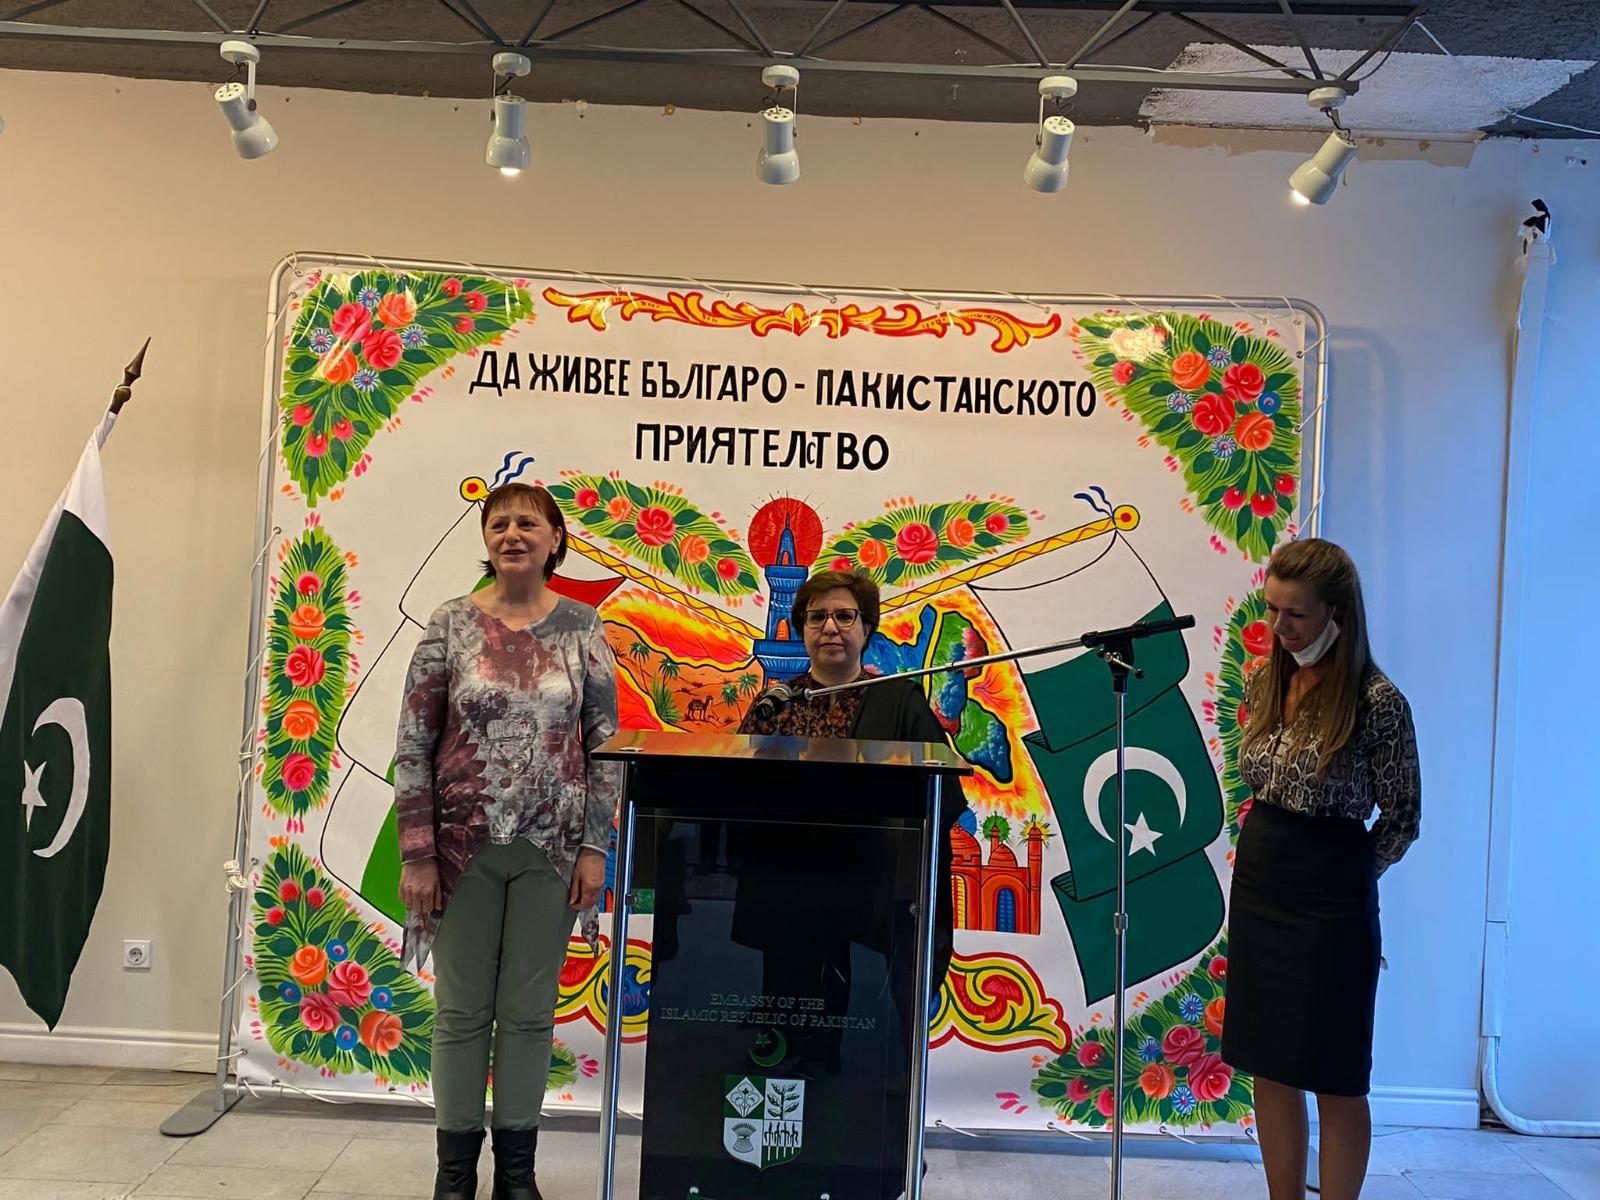 the-embassy-of-pakistan-in-sofia-bulgaria-in-collaboration-with-the-sredets-cultural-center